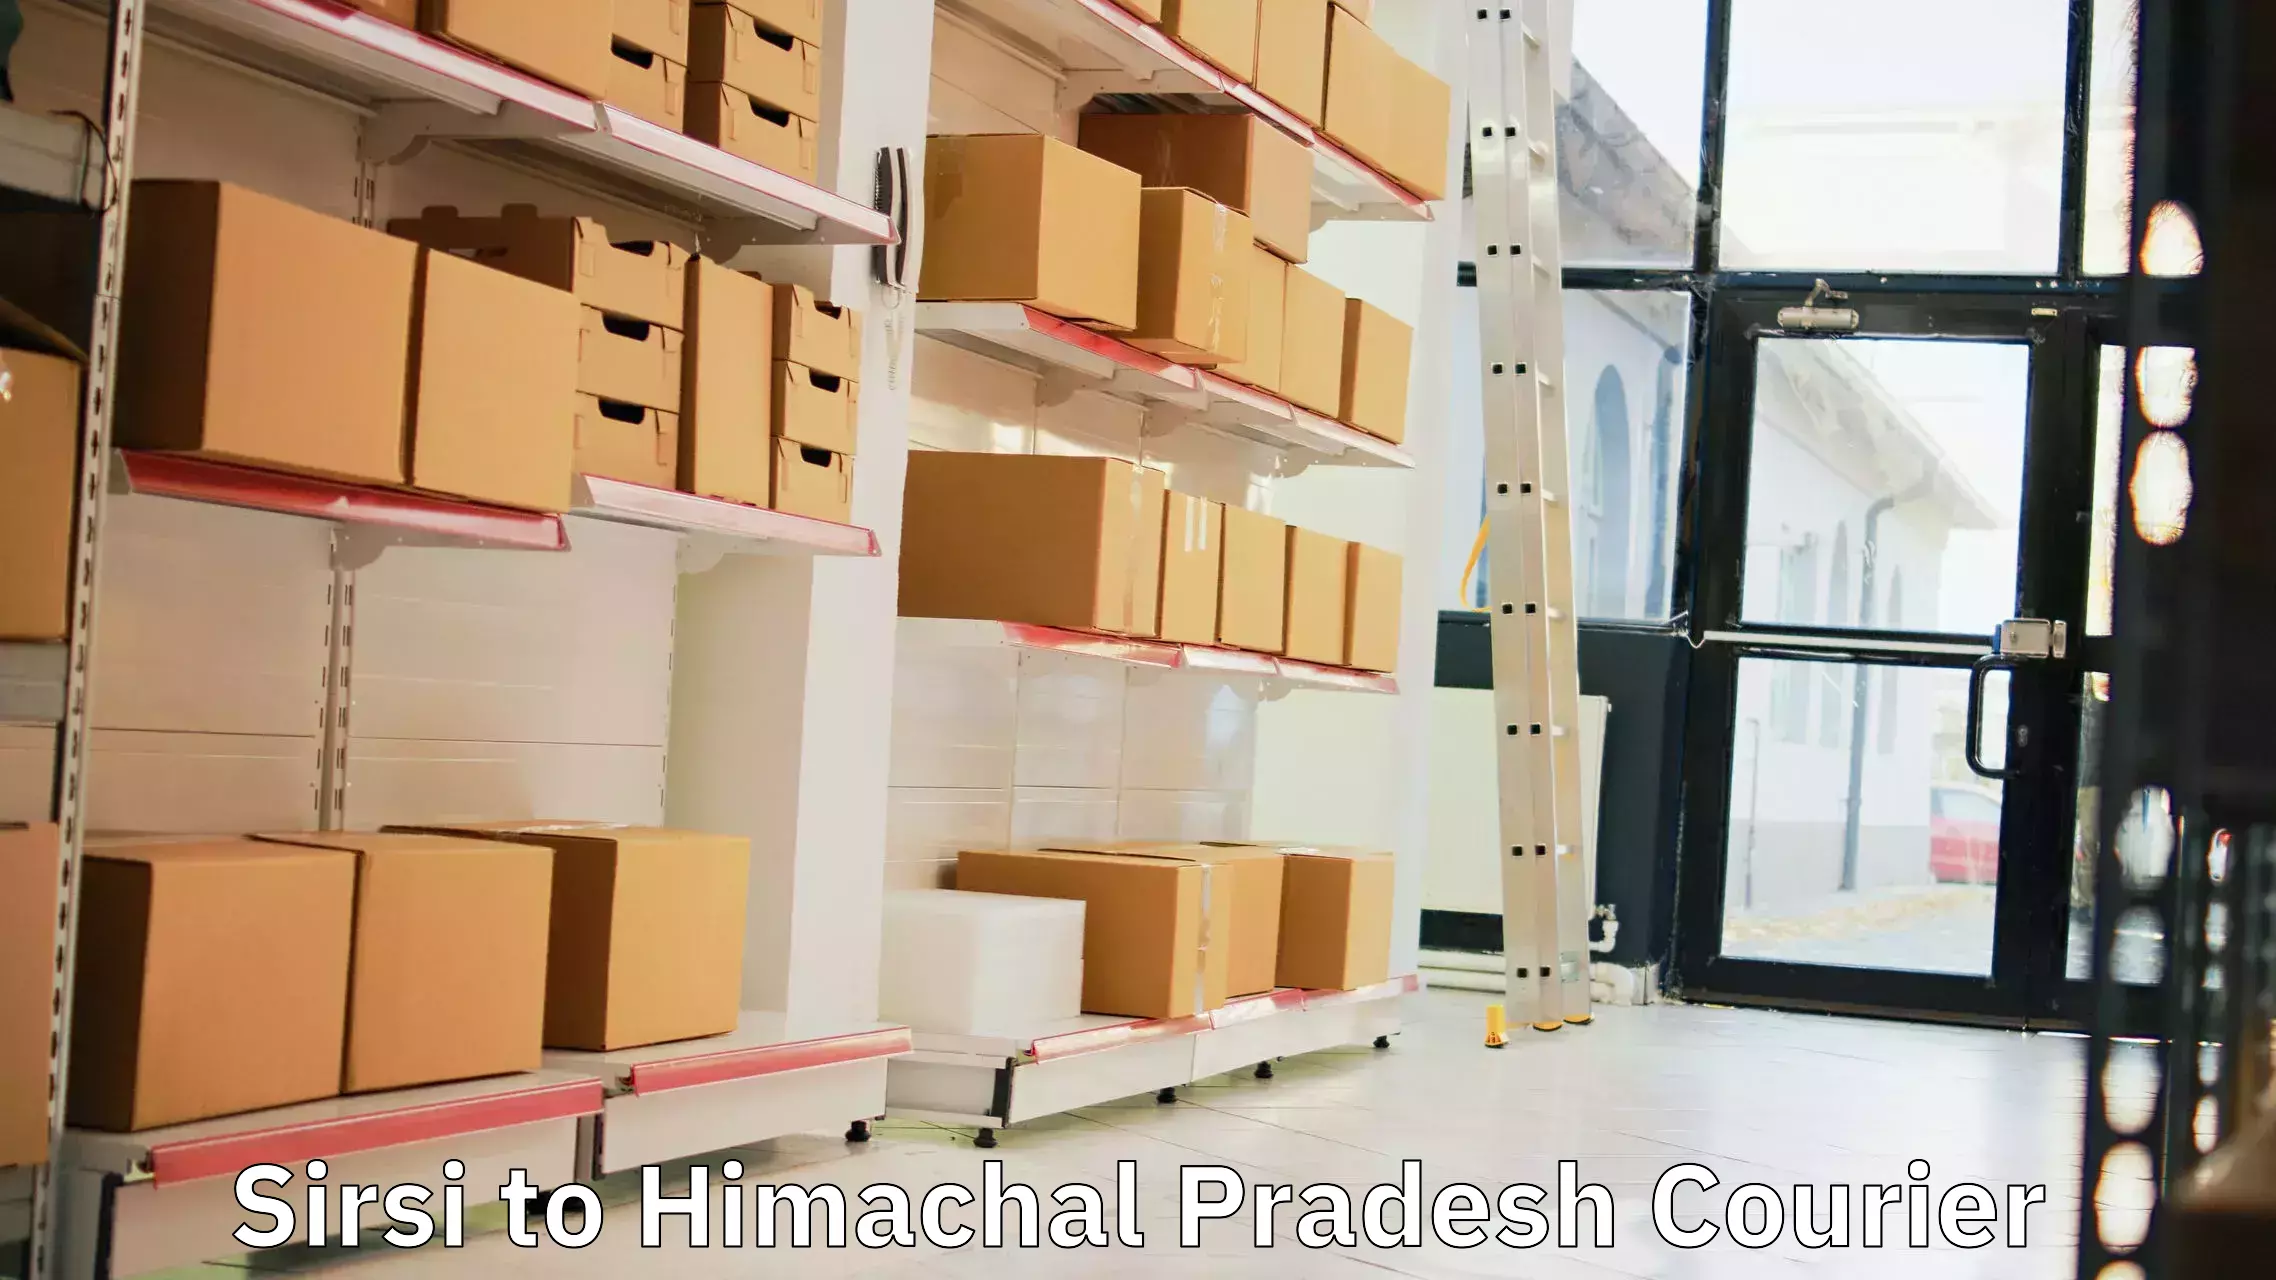 Medical delivery services Sirsi to Himachal Pradesh